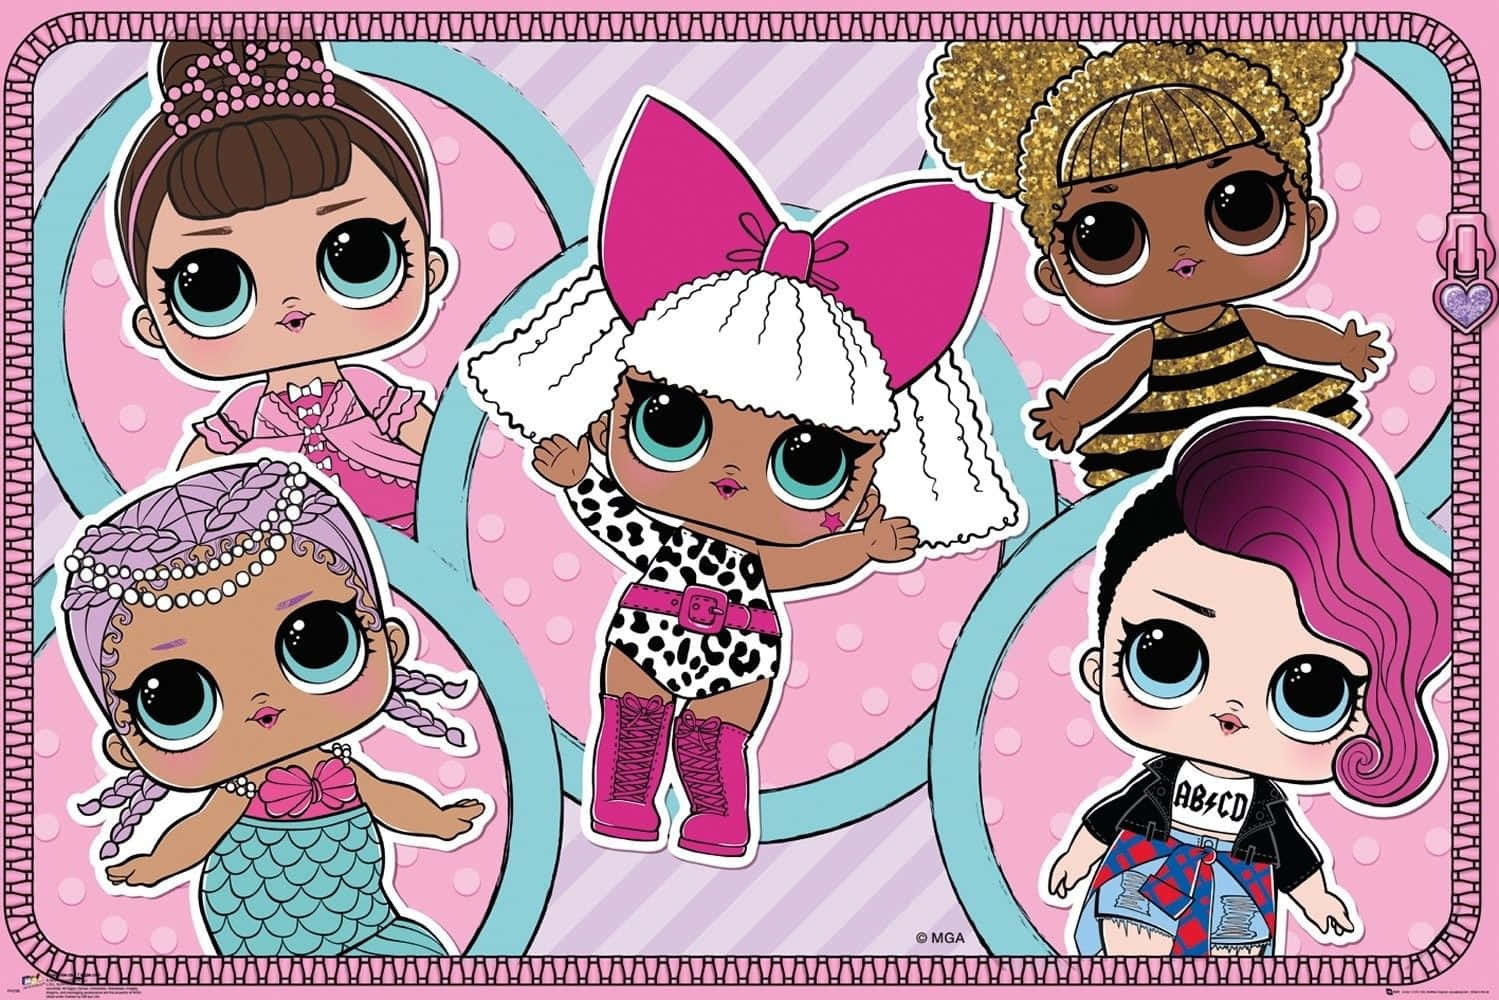 "Collect All Your Favourite L.O.L Surprise! Dolls!"